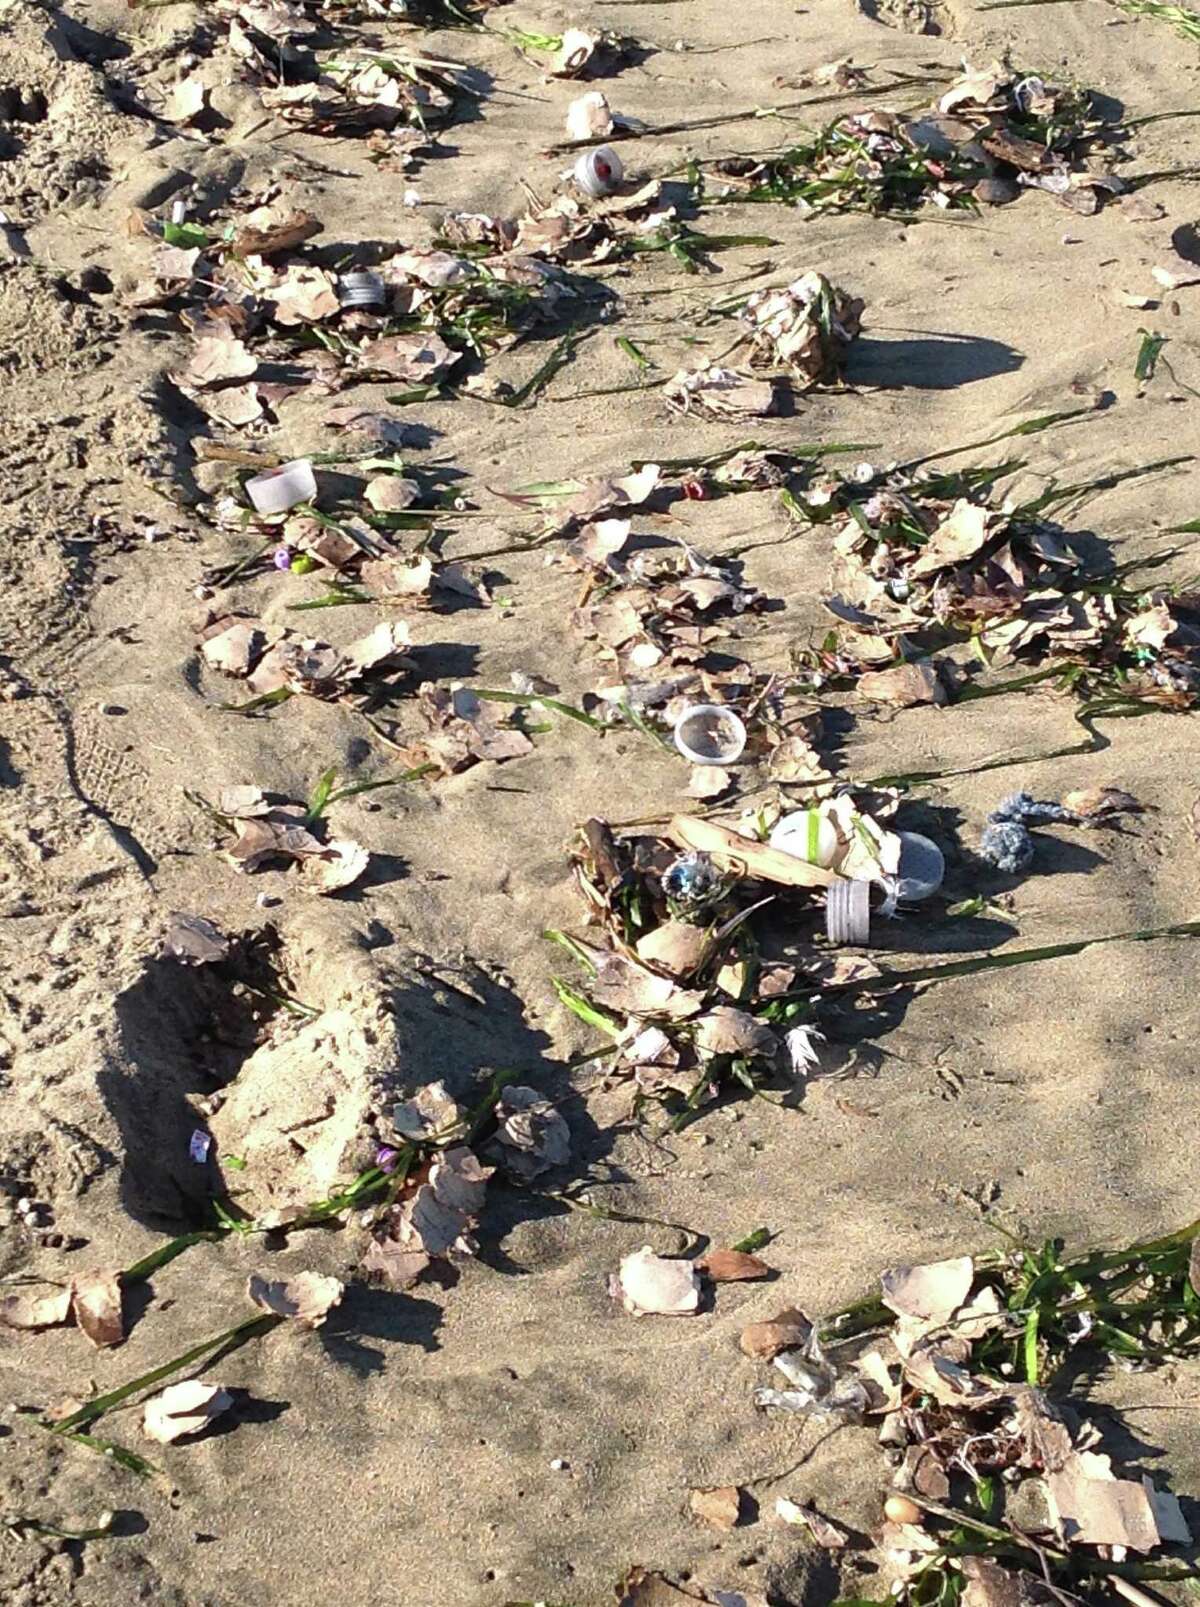 Park officials cleaned up debris that washed ashore Sunday following the Macy’s fireworks show.